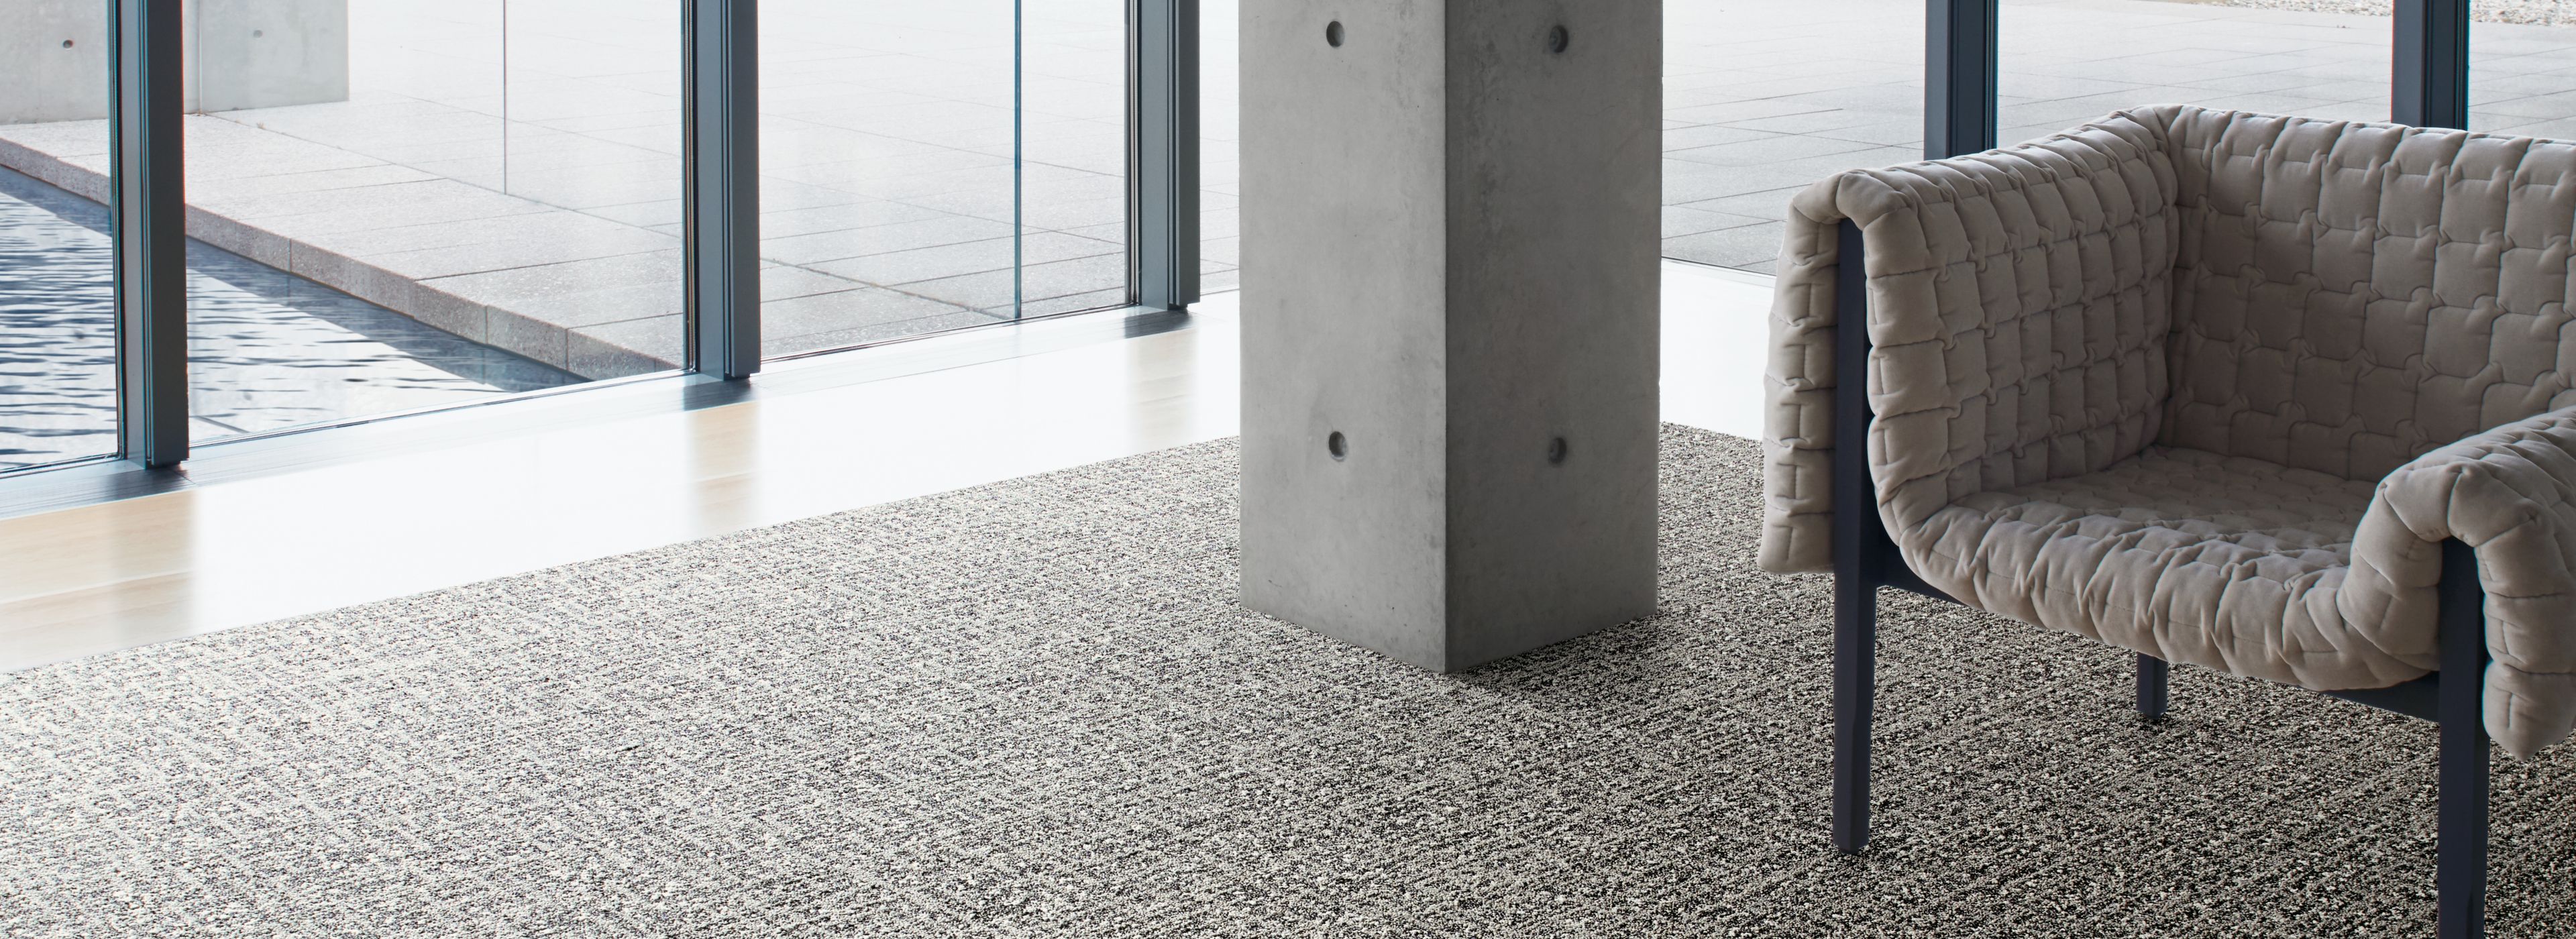 Interface WW890 plank carpet tile and Textured Stones LVT in lobby area with chair imagen número 1